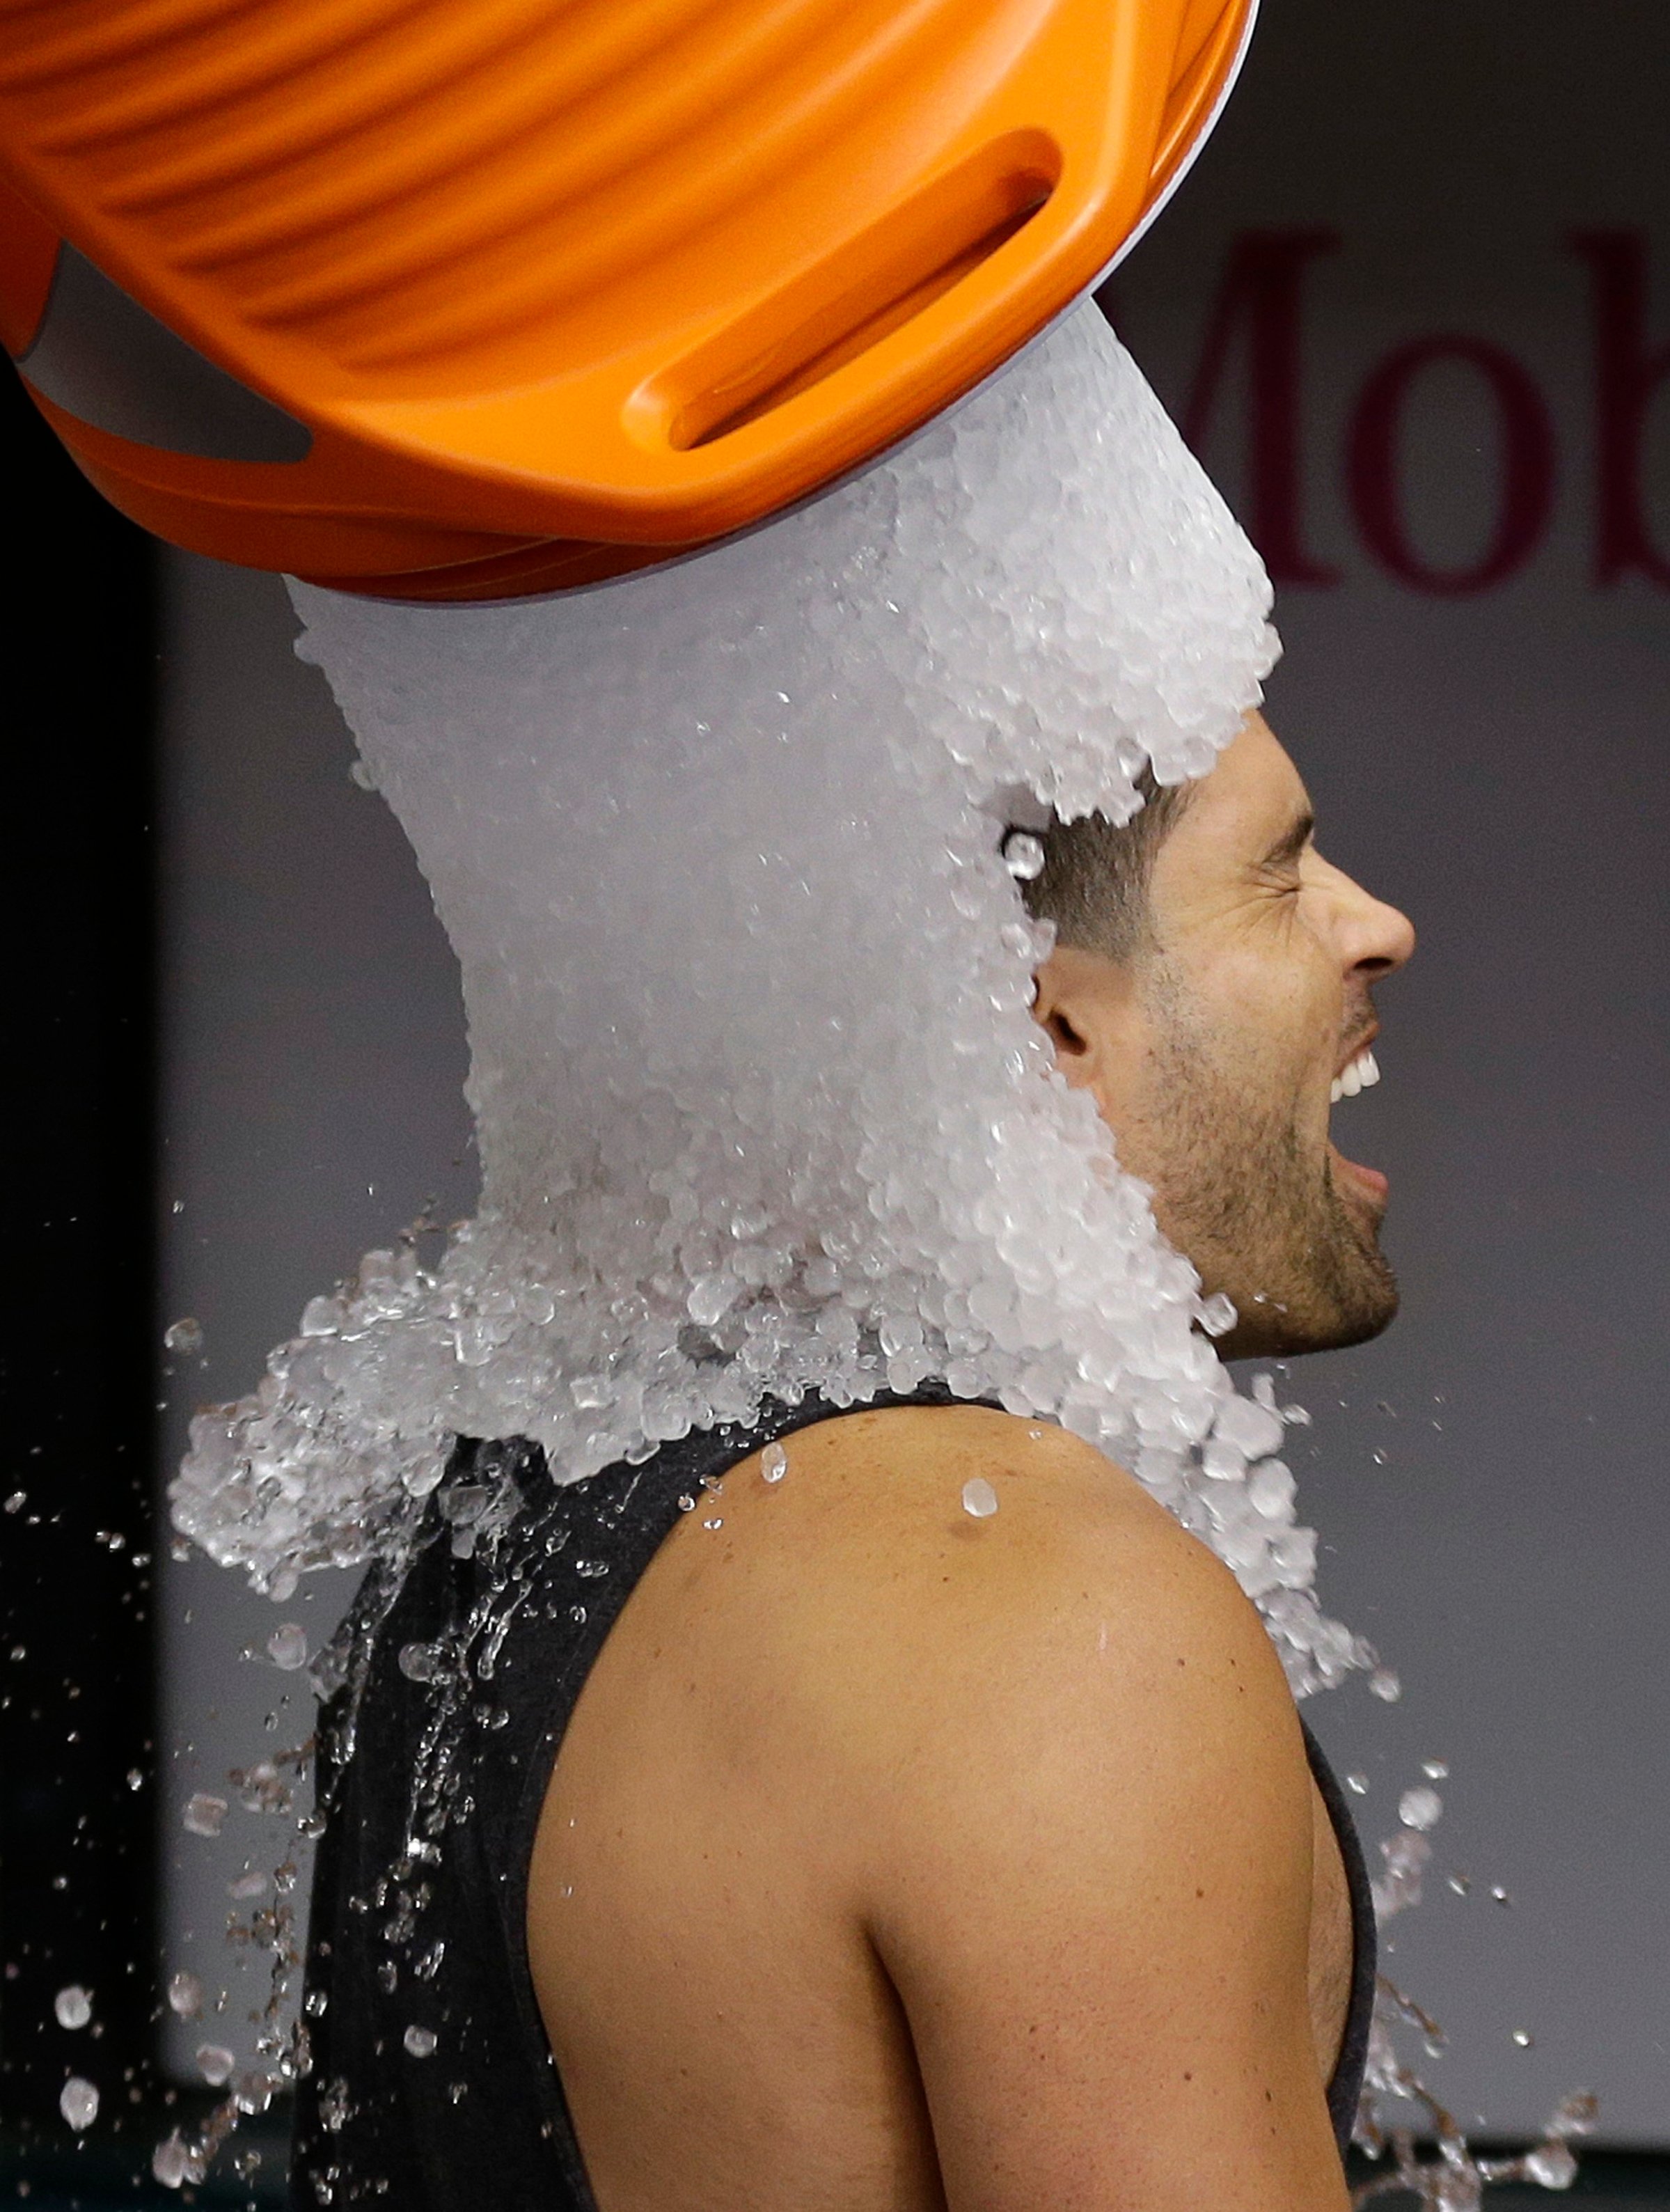 Tampa Bay Rays' David DeJesus gets a bucket of ice dumped on his head from video coordinator Chris Fernandez as part of the ALS Ice Bucket Challenge before a baseball game against the New York Yankees on Aug. 17, 2014, in St. Petersburg, Fla.